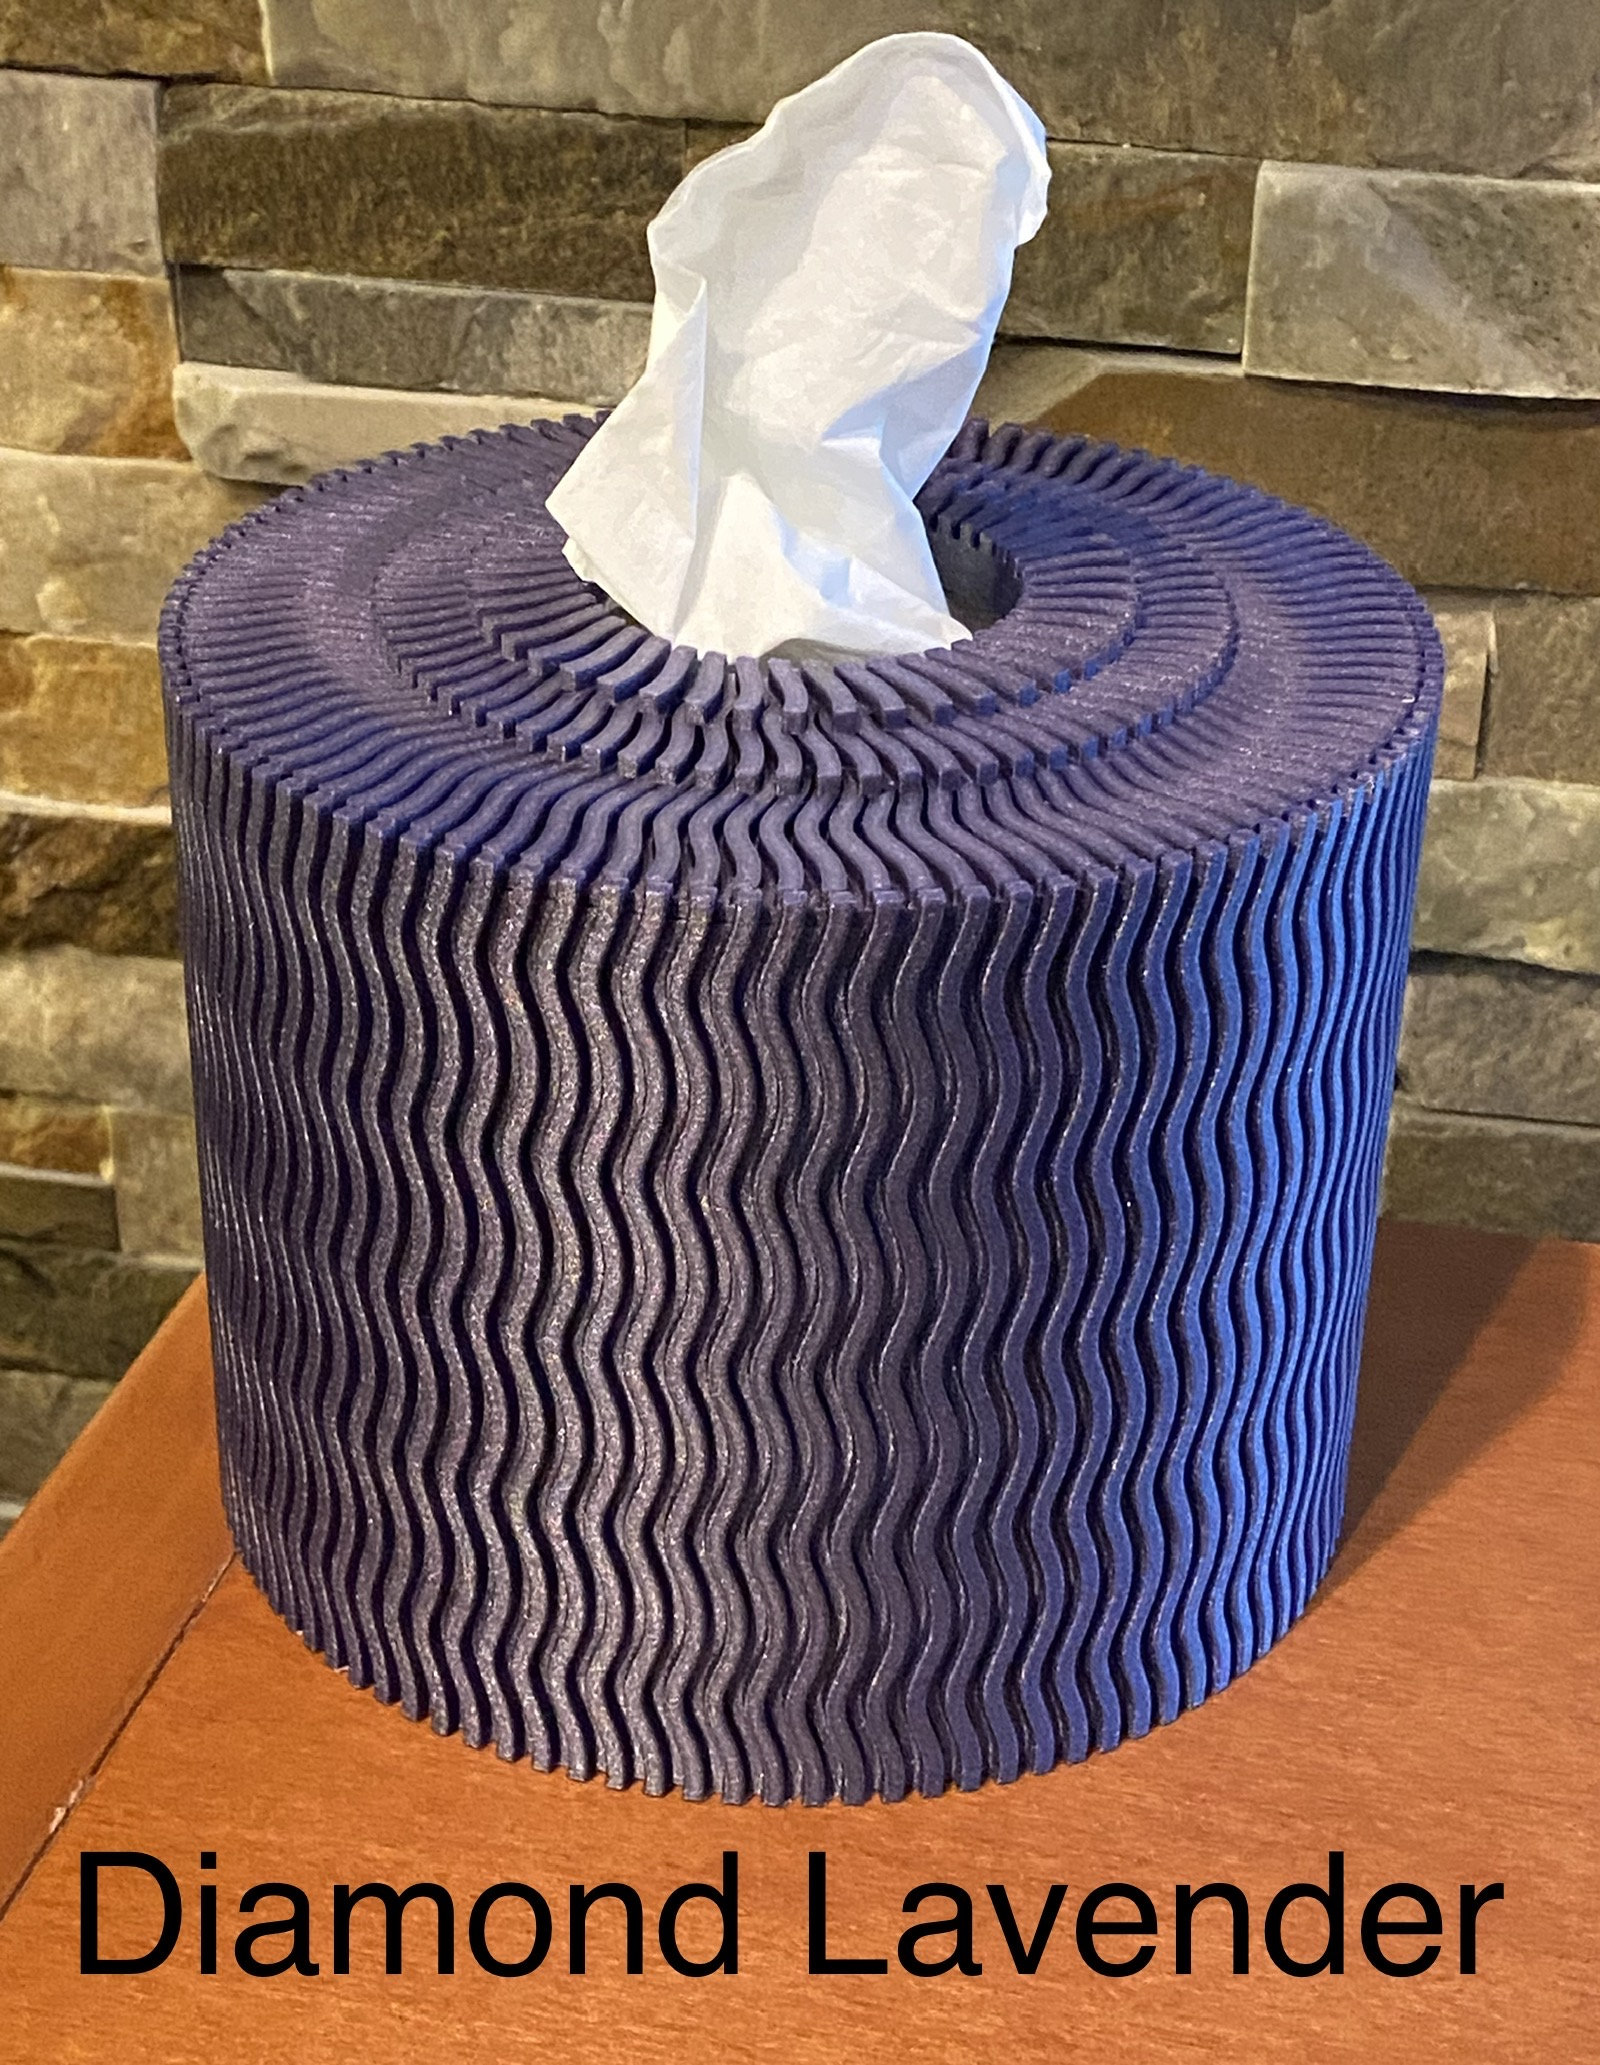 woven tissue holder] handmade cotton I with a roll of paper towels